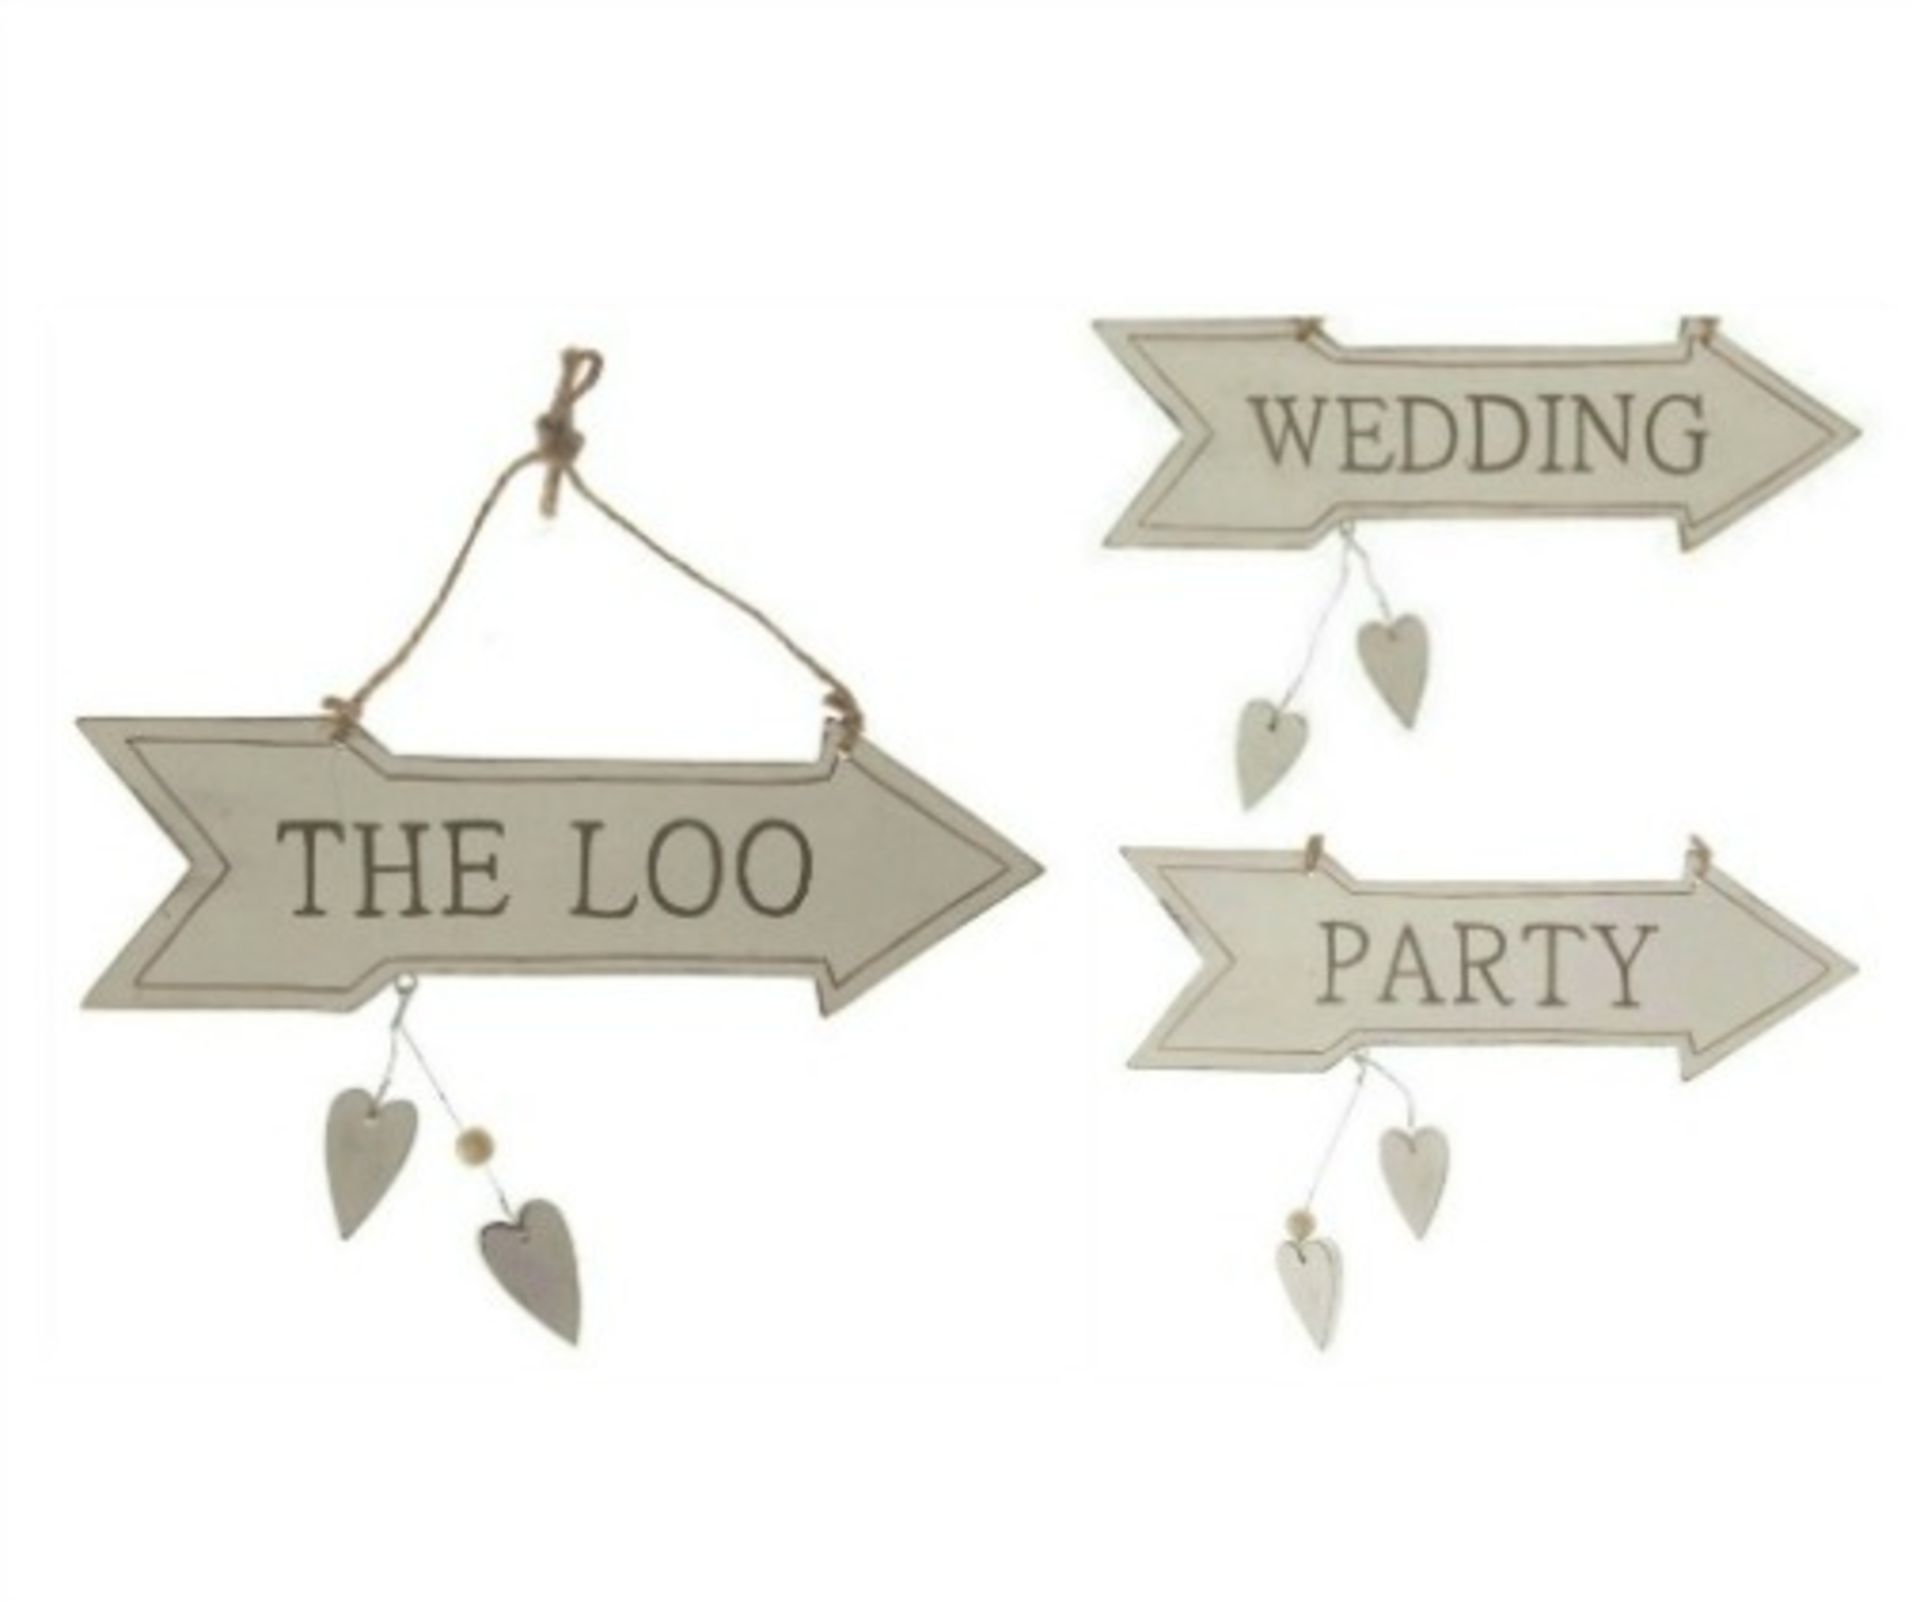 500 X WEDDING, PARTY, POINTING ARROWS, MR AND MRS, THE LOO. RRP £ 1,265.80